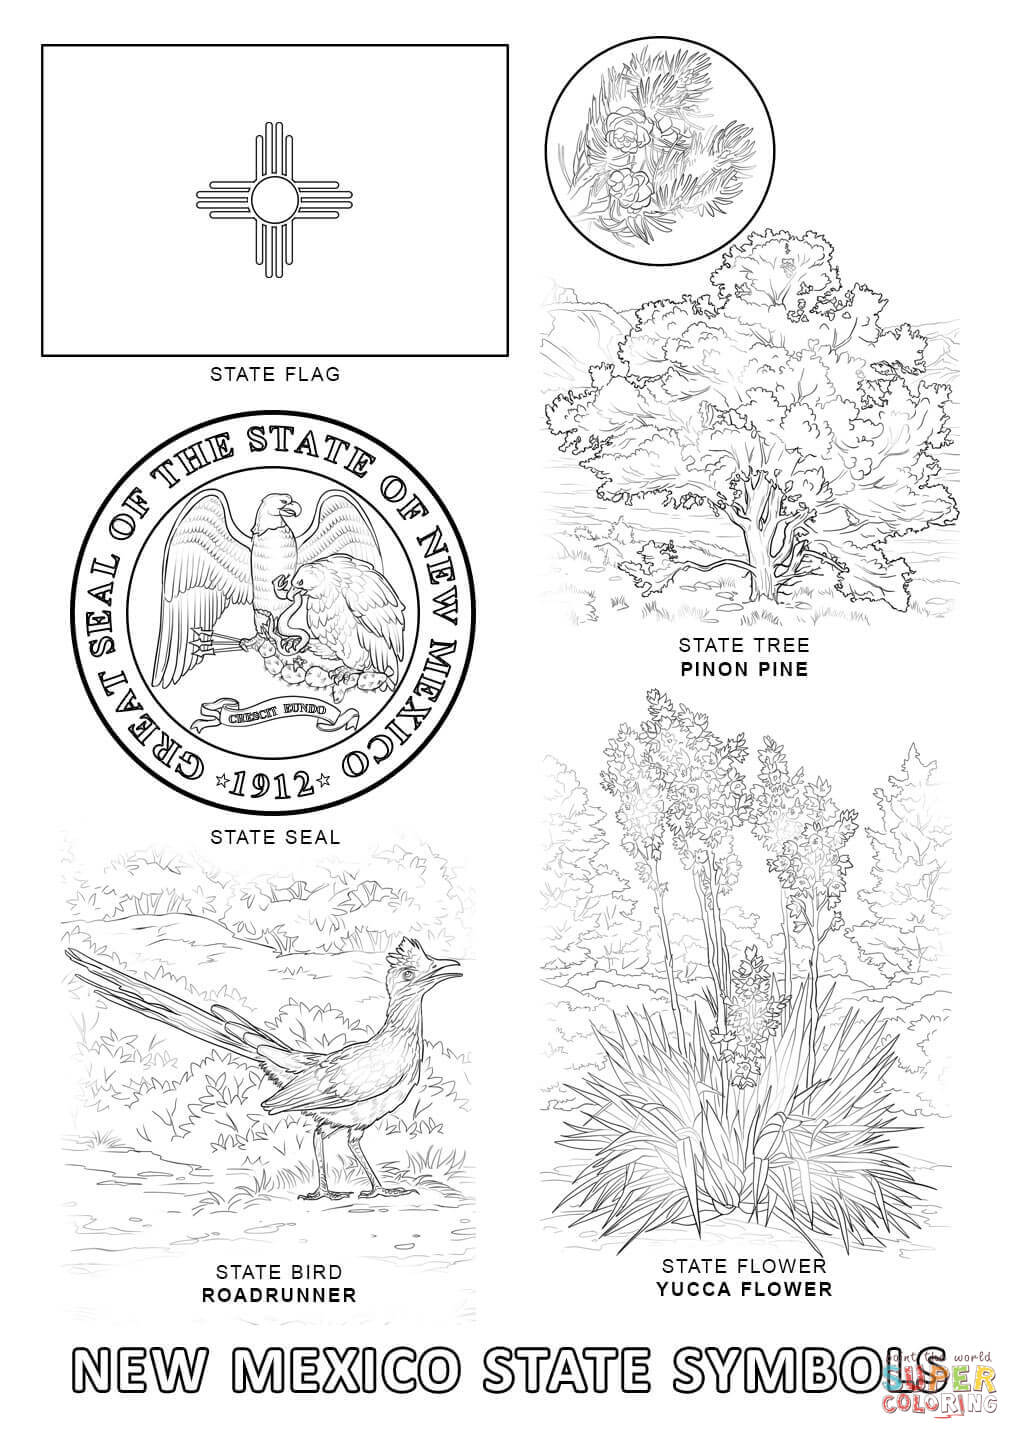 New Mexico State Symbols coloring page | Free Printable Coloring Pages